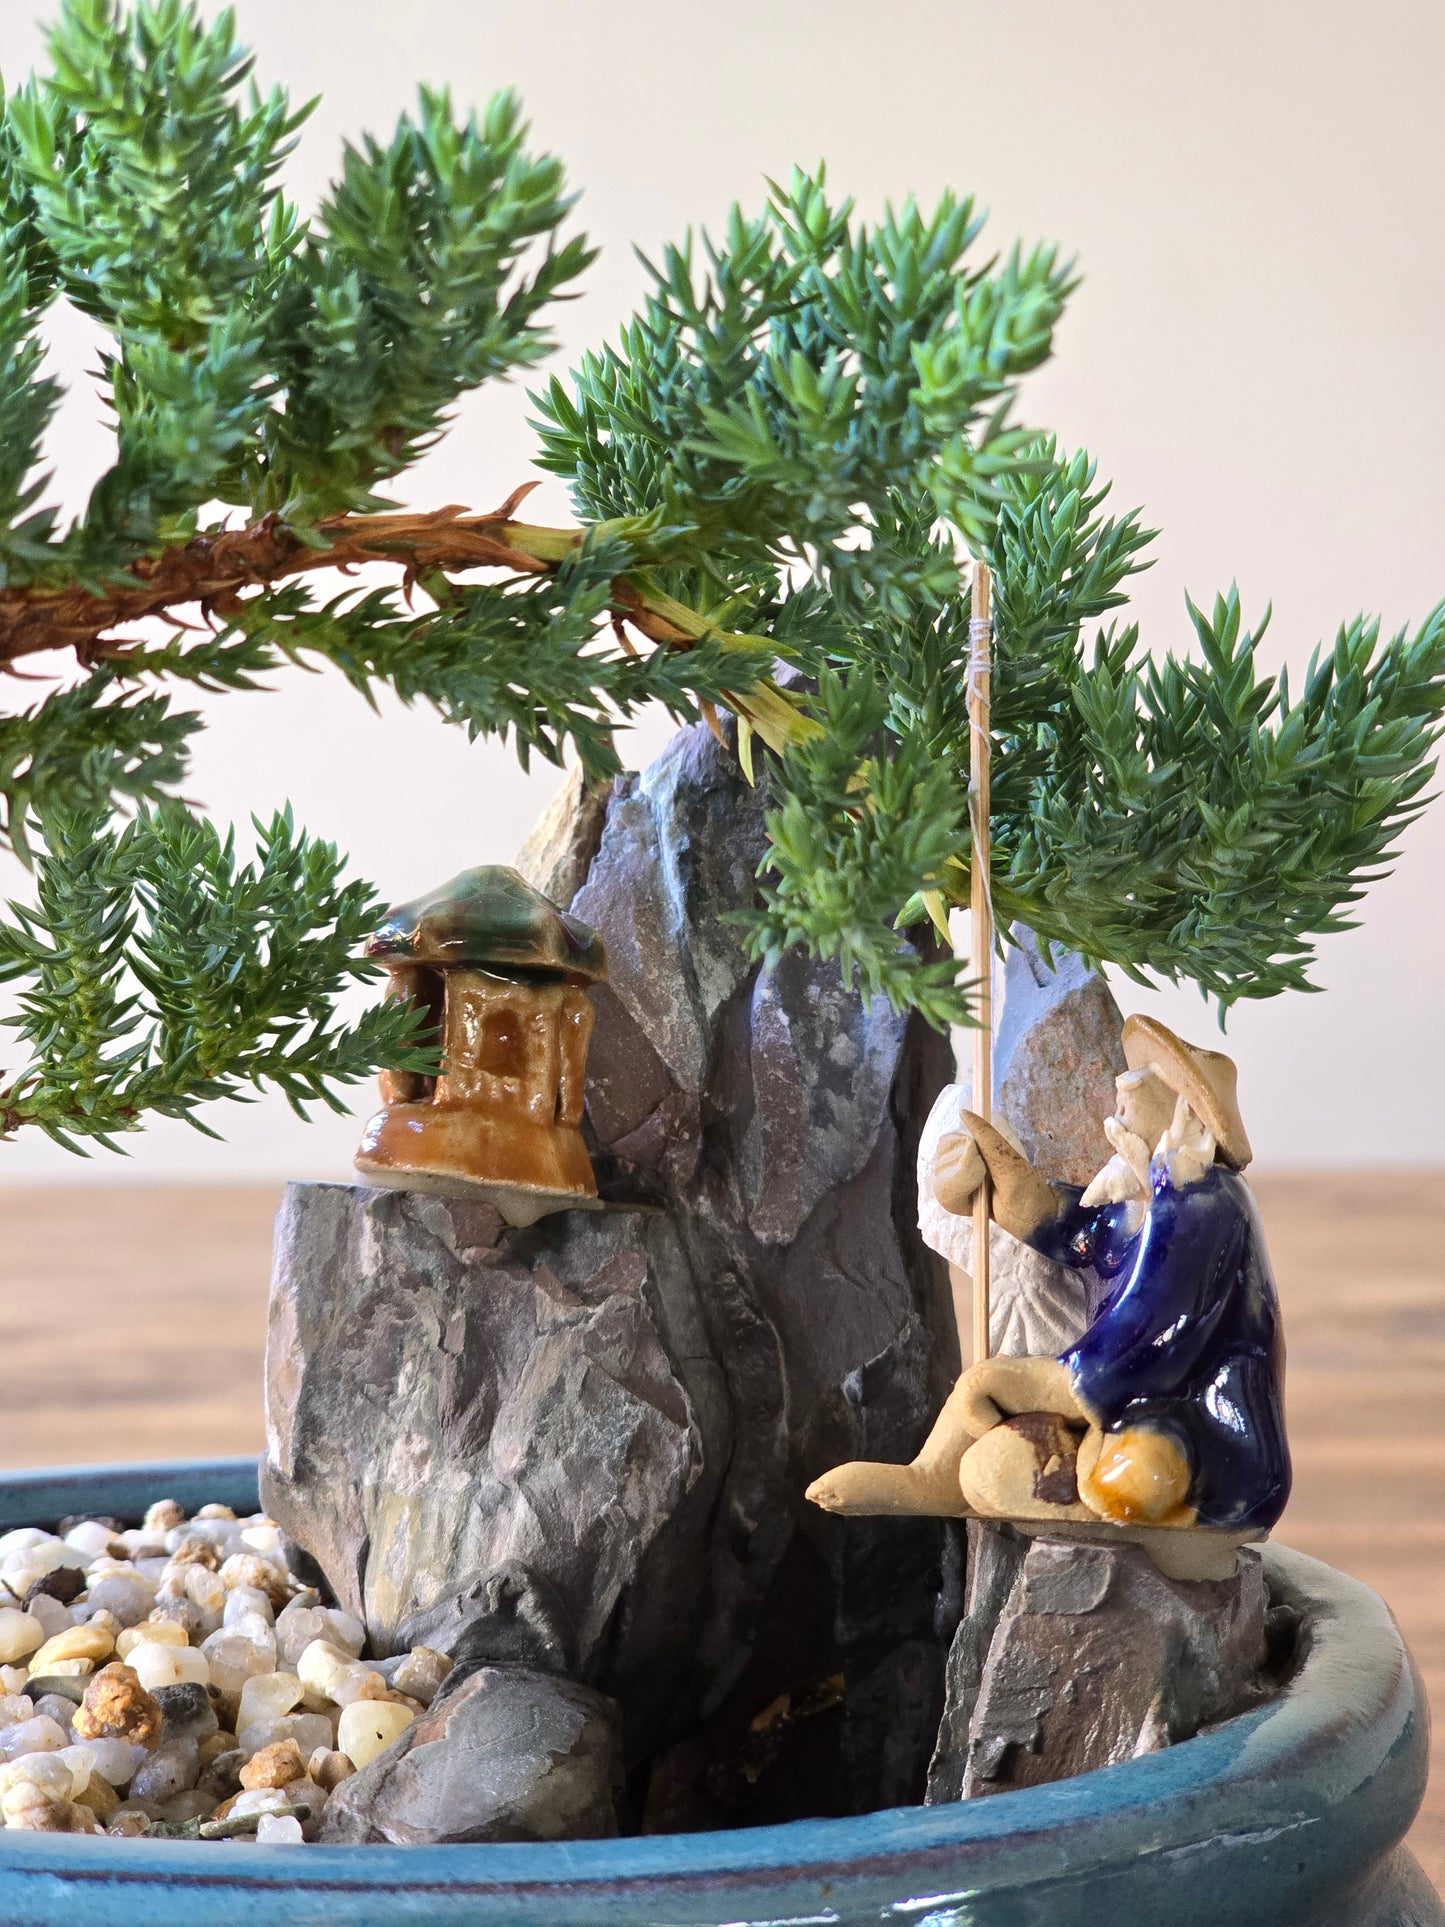 Juniper Bonsai with figurines and pond #001